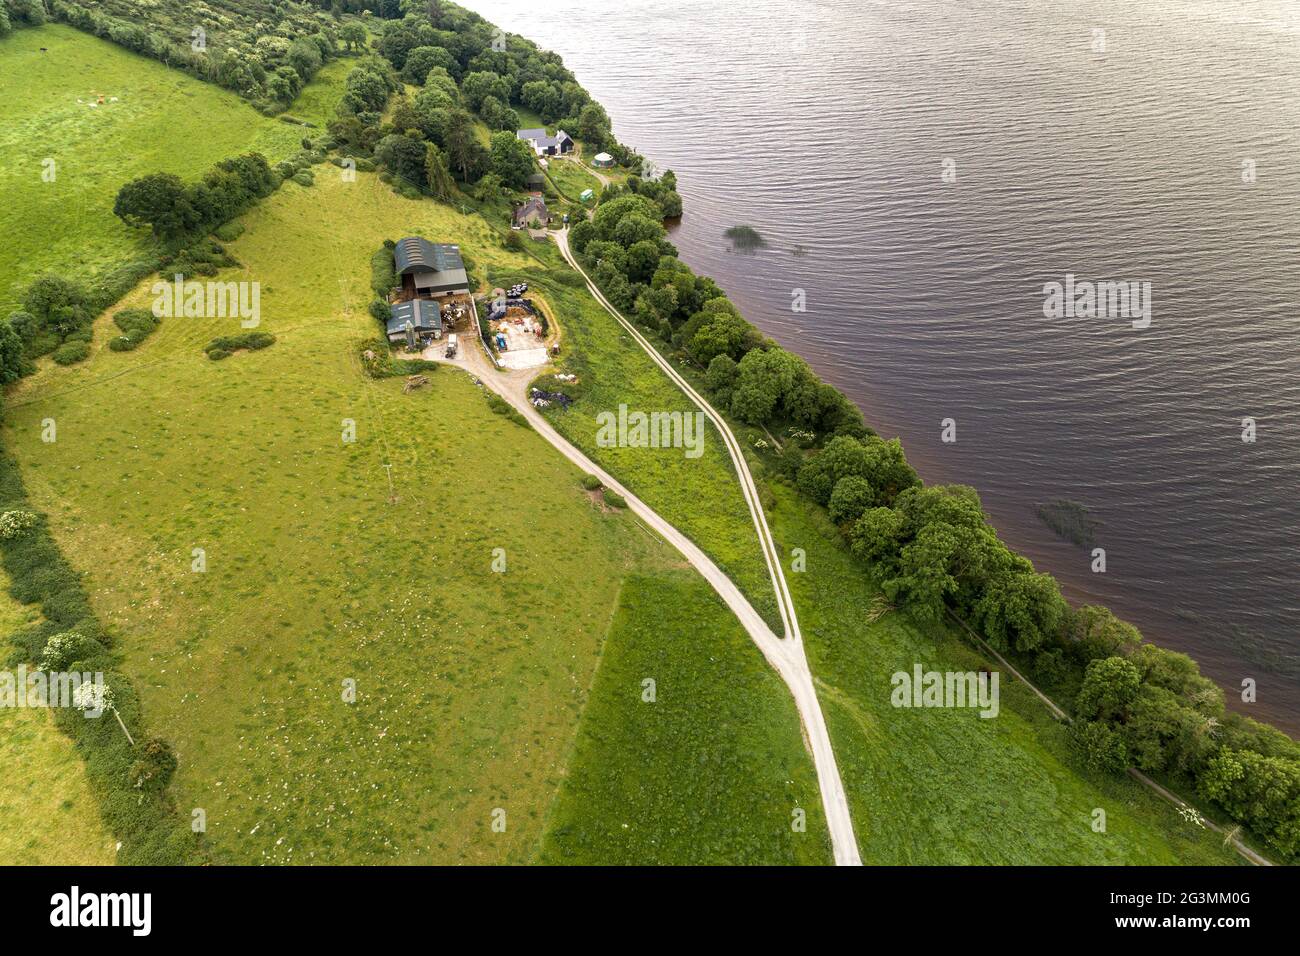 Castle Town Cemetery on Lough Derg, County Tipperary Ireland Stockfoto